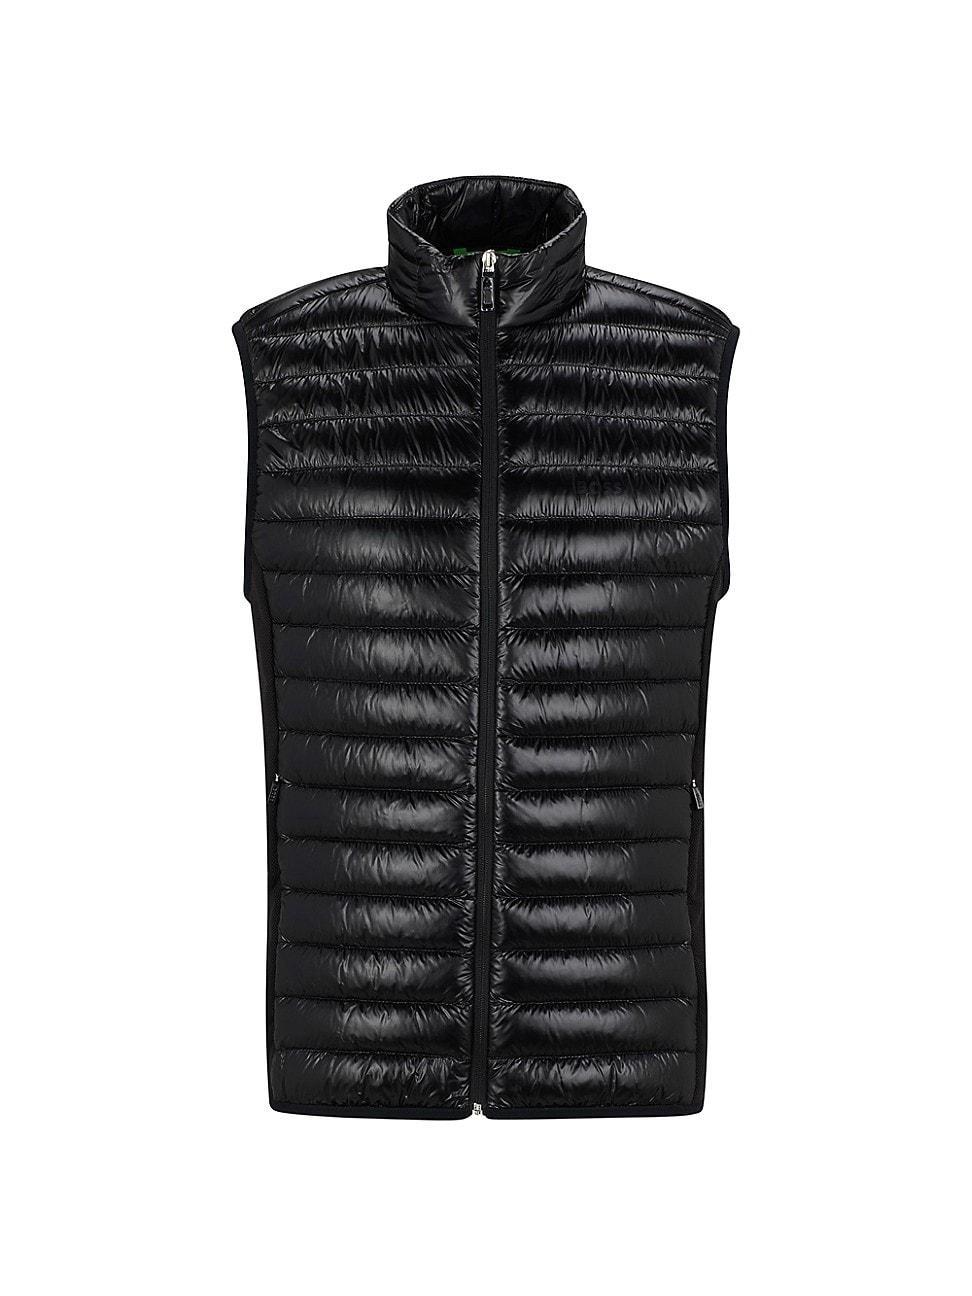 Boss by Hugo Boss Mens Lightweight Water-Repellent Gilet Product Image